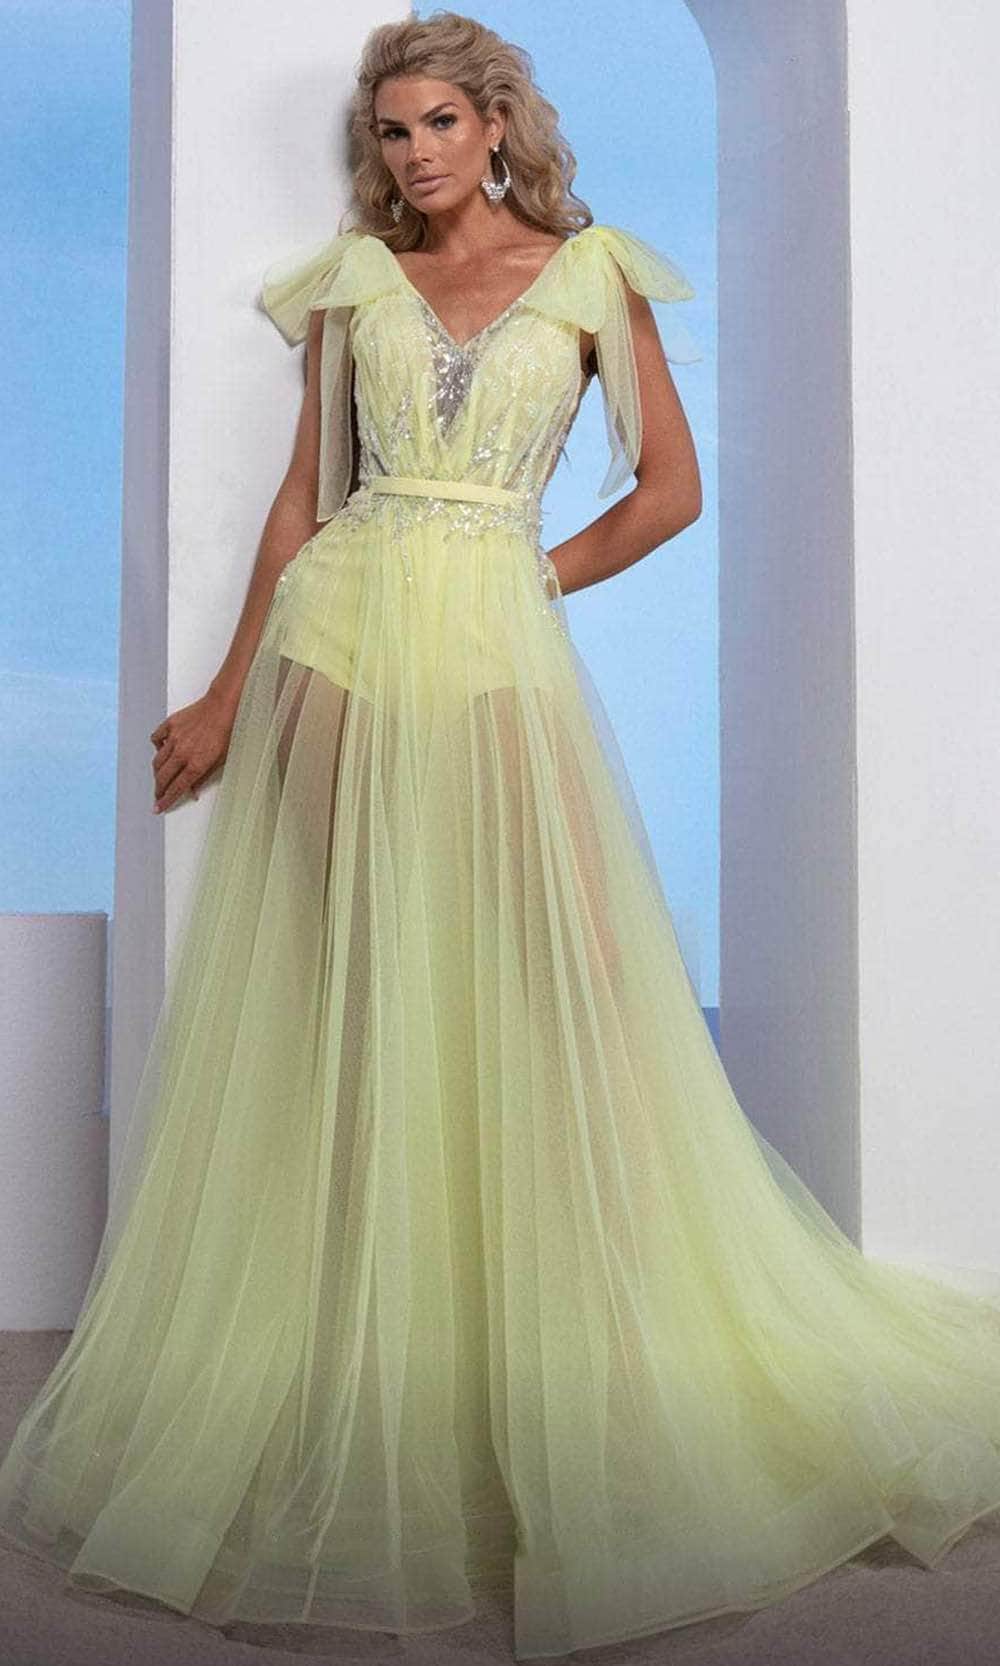 Image of MNM Couture M0080 - Embellished A-Line Prom Dress